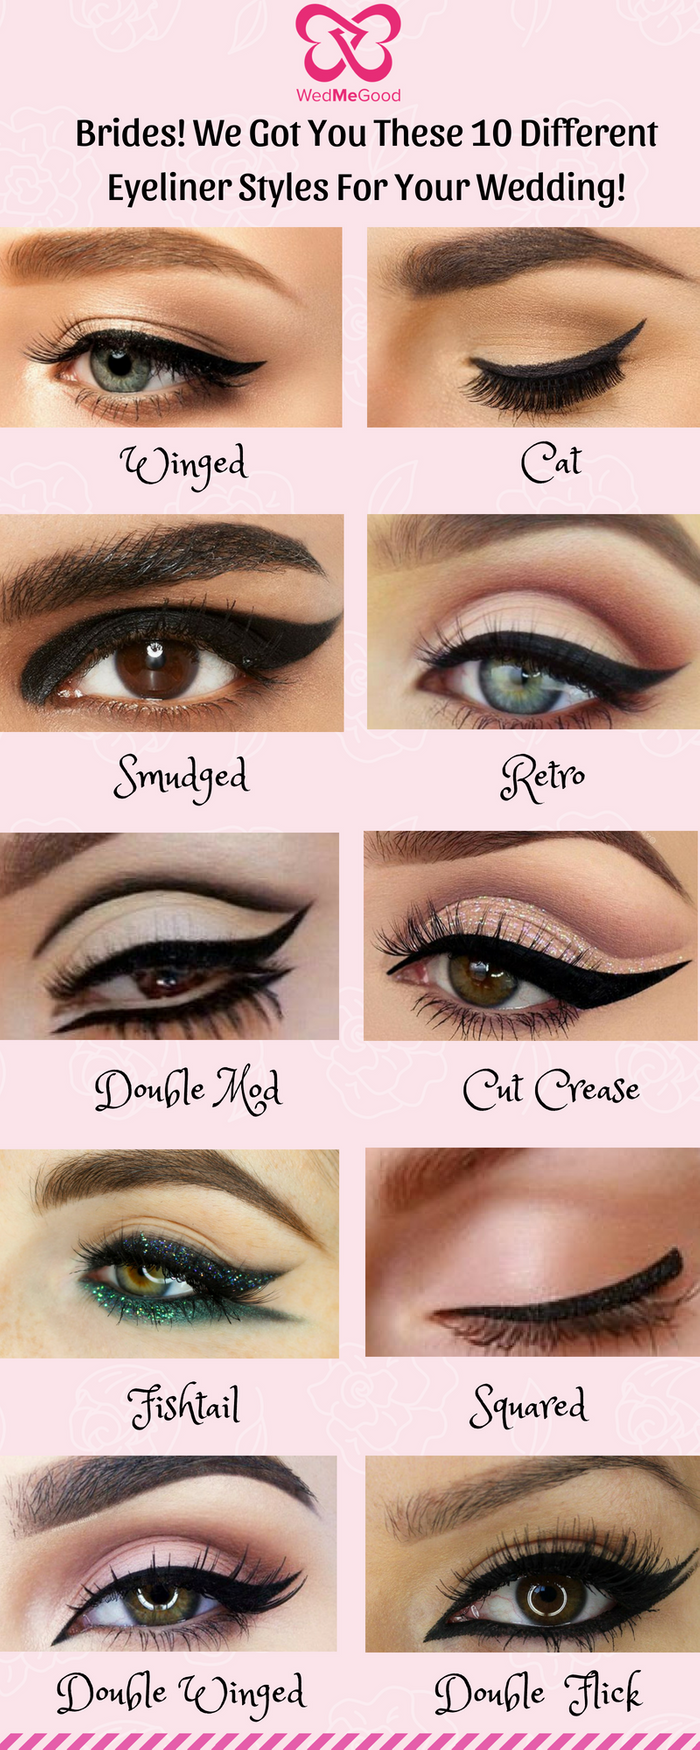 it Winged or a Cat Eyeliner! We Got You These 10 Different Eyeliner Styles for Your Wedding! | WedMeGood